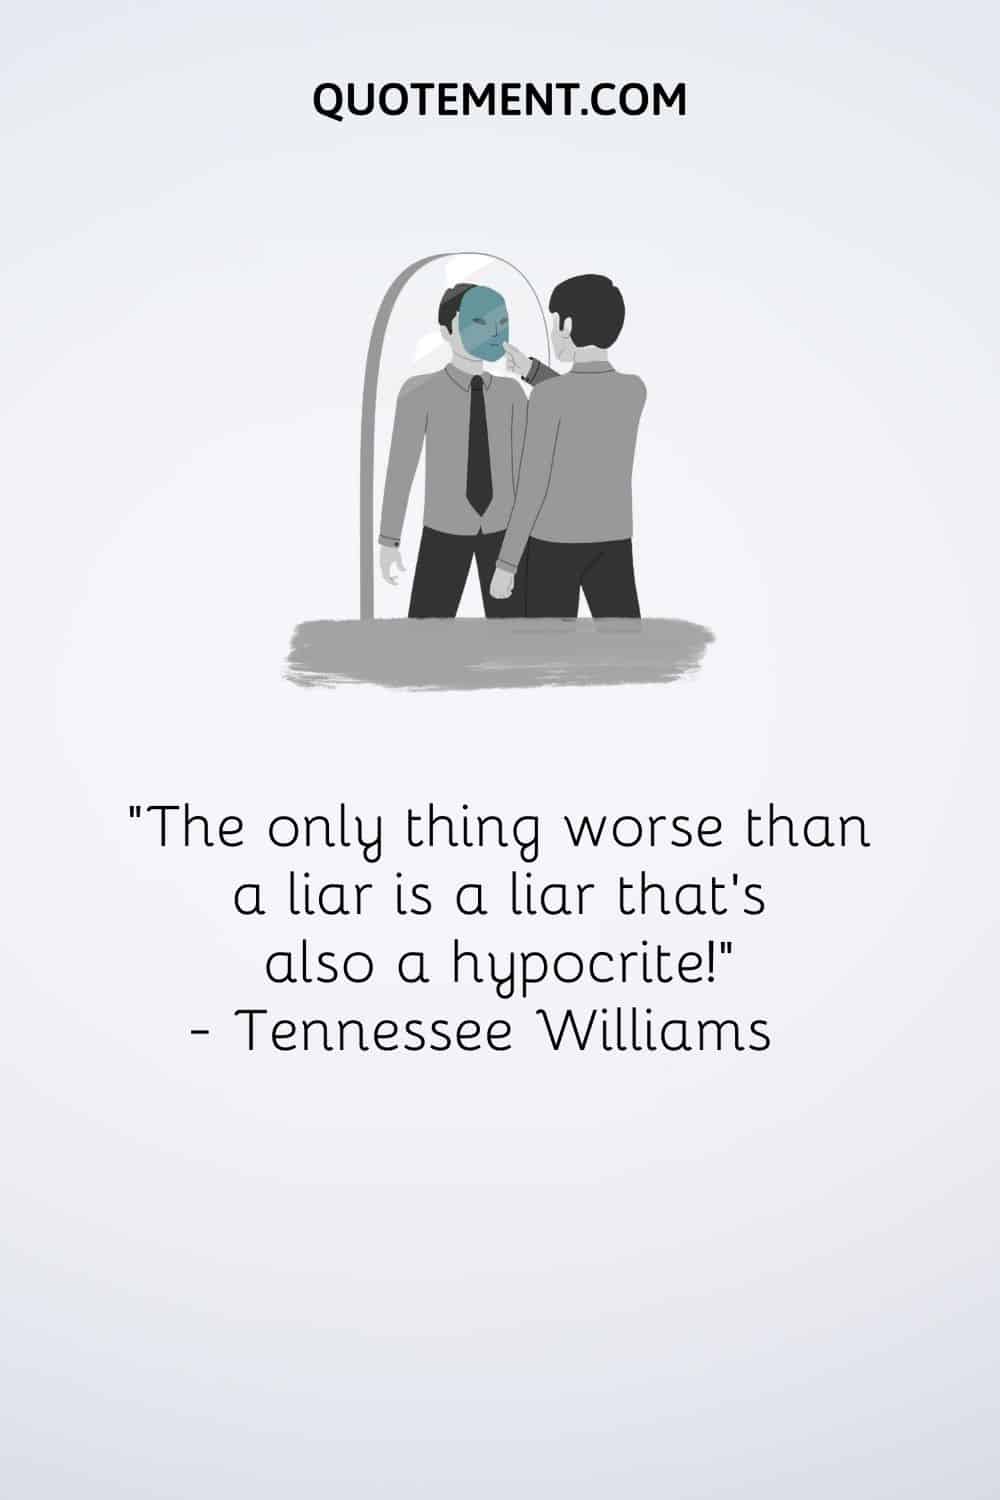 “The only thing worse than a liar is a liar that’s also a hypocrite!” — Tennessee Williams